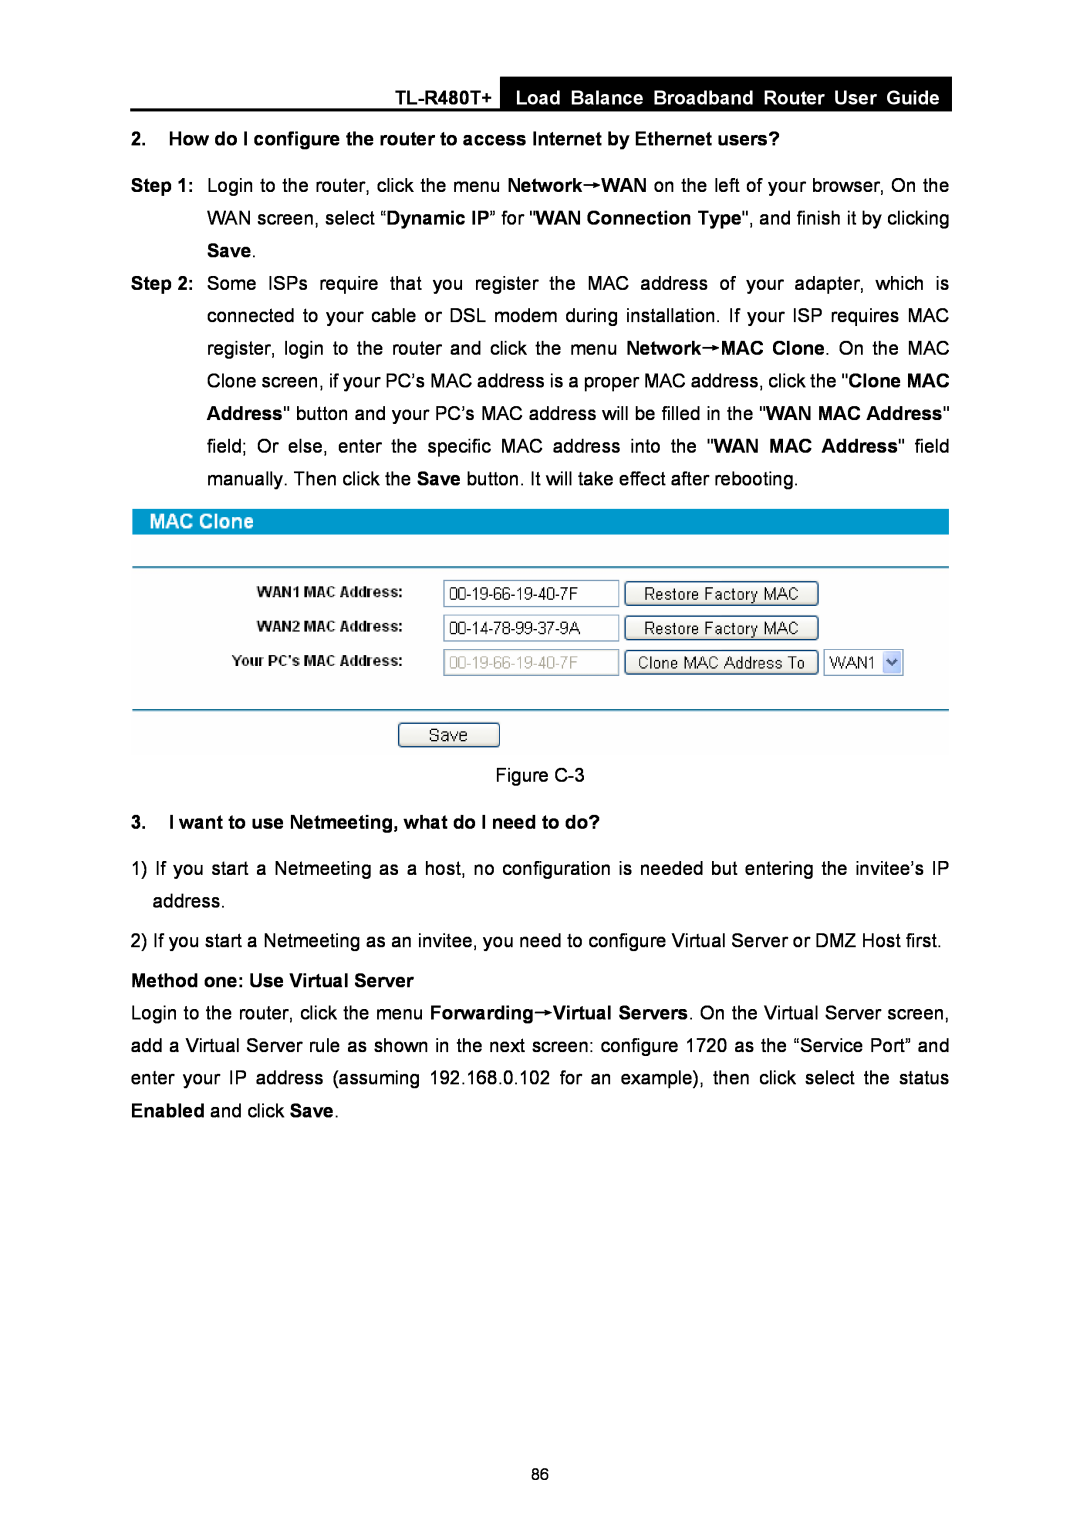 TP-Link manual TL-R480T+ Load Balance Broadband Router User Guide, Save, I want to use Netmeeting, what do I need to do? 